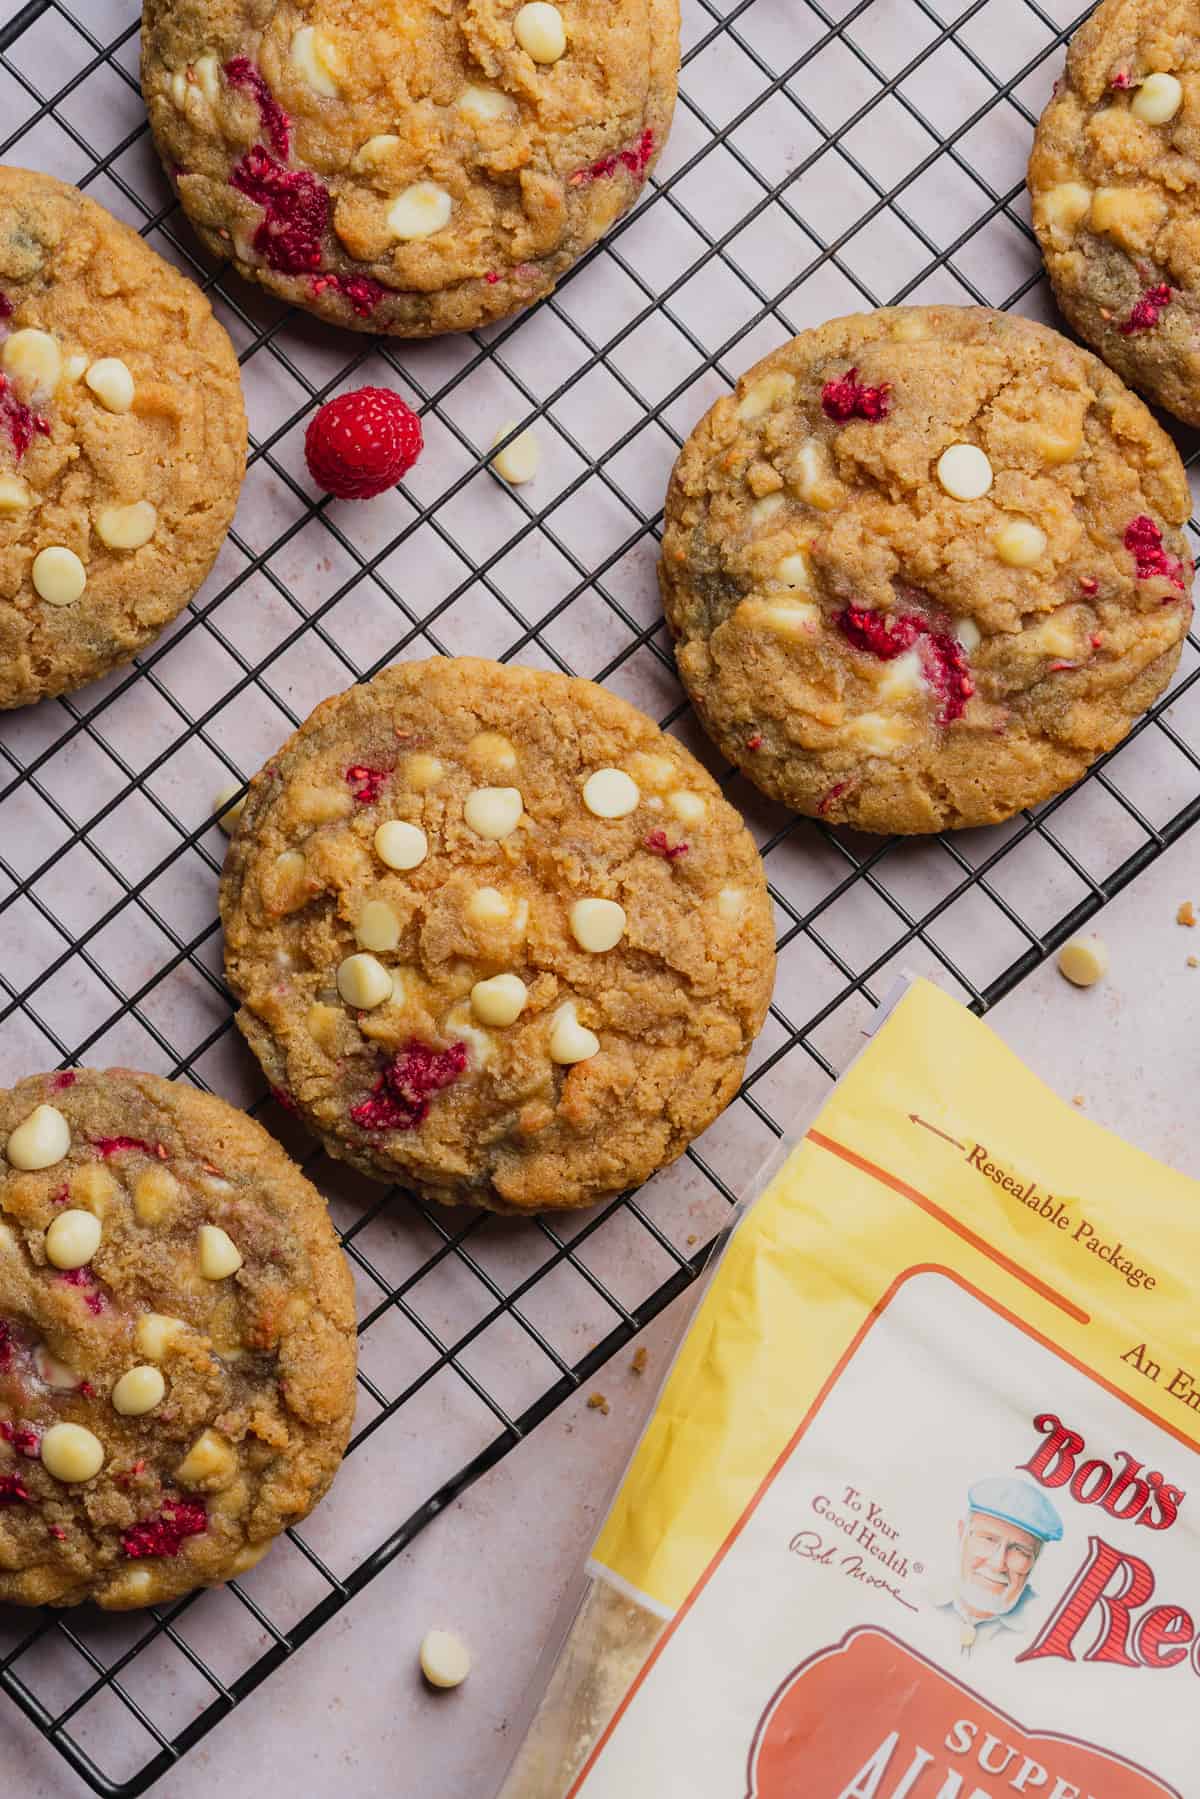 close up shot of raspberry and white chocolate cookies with a bag of bob's red mill almond flour 